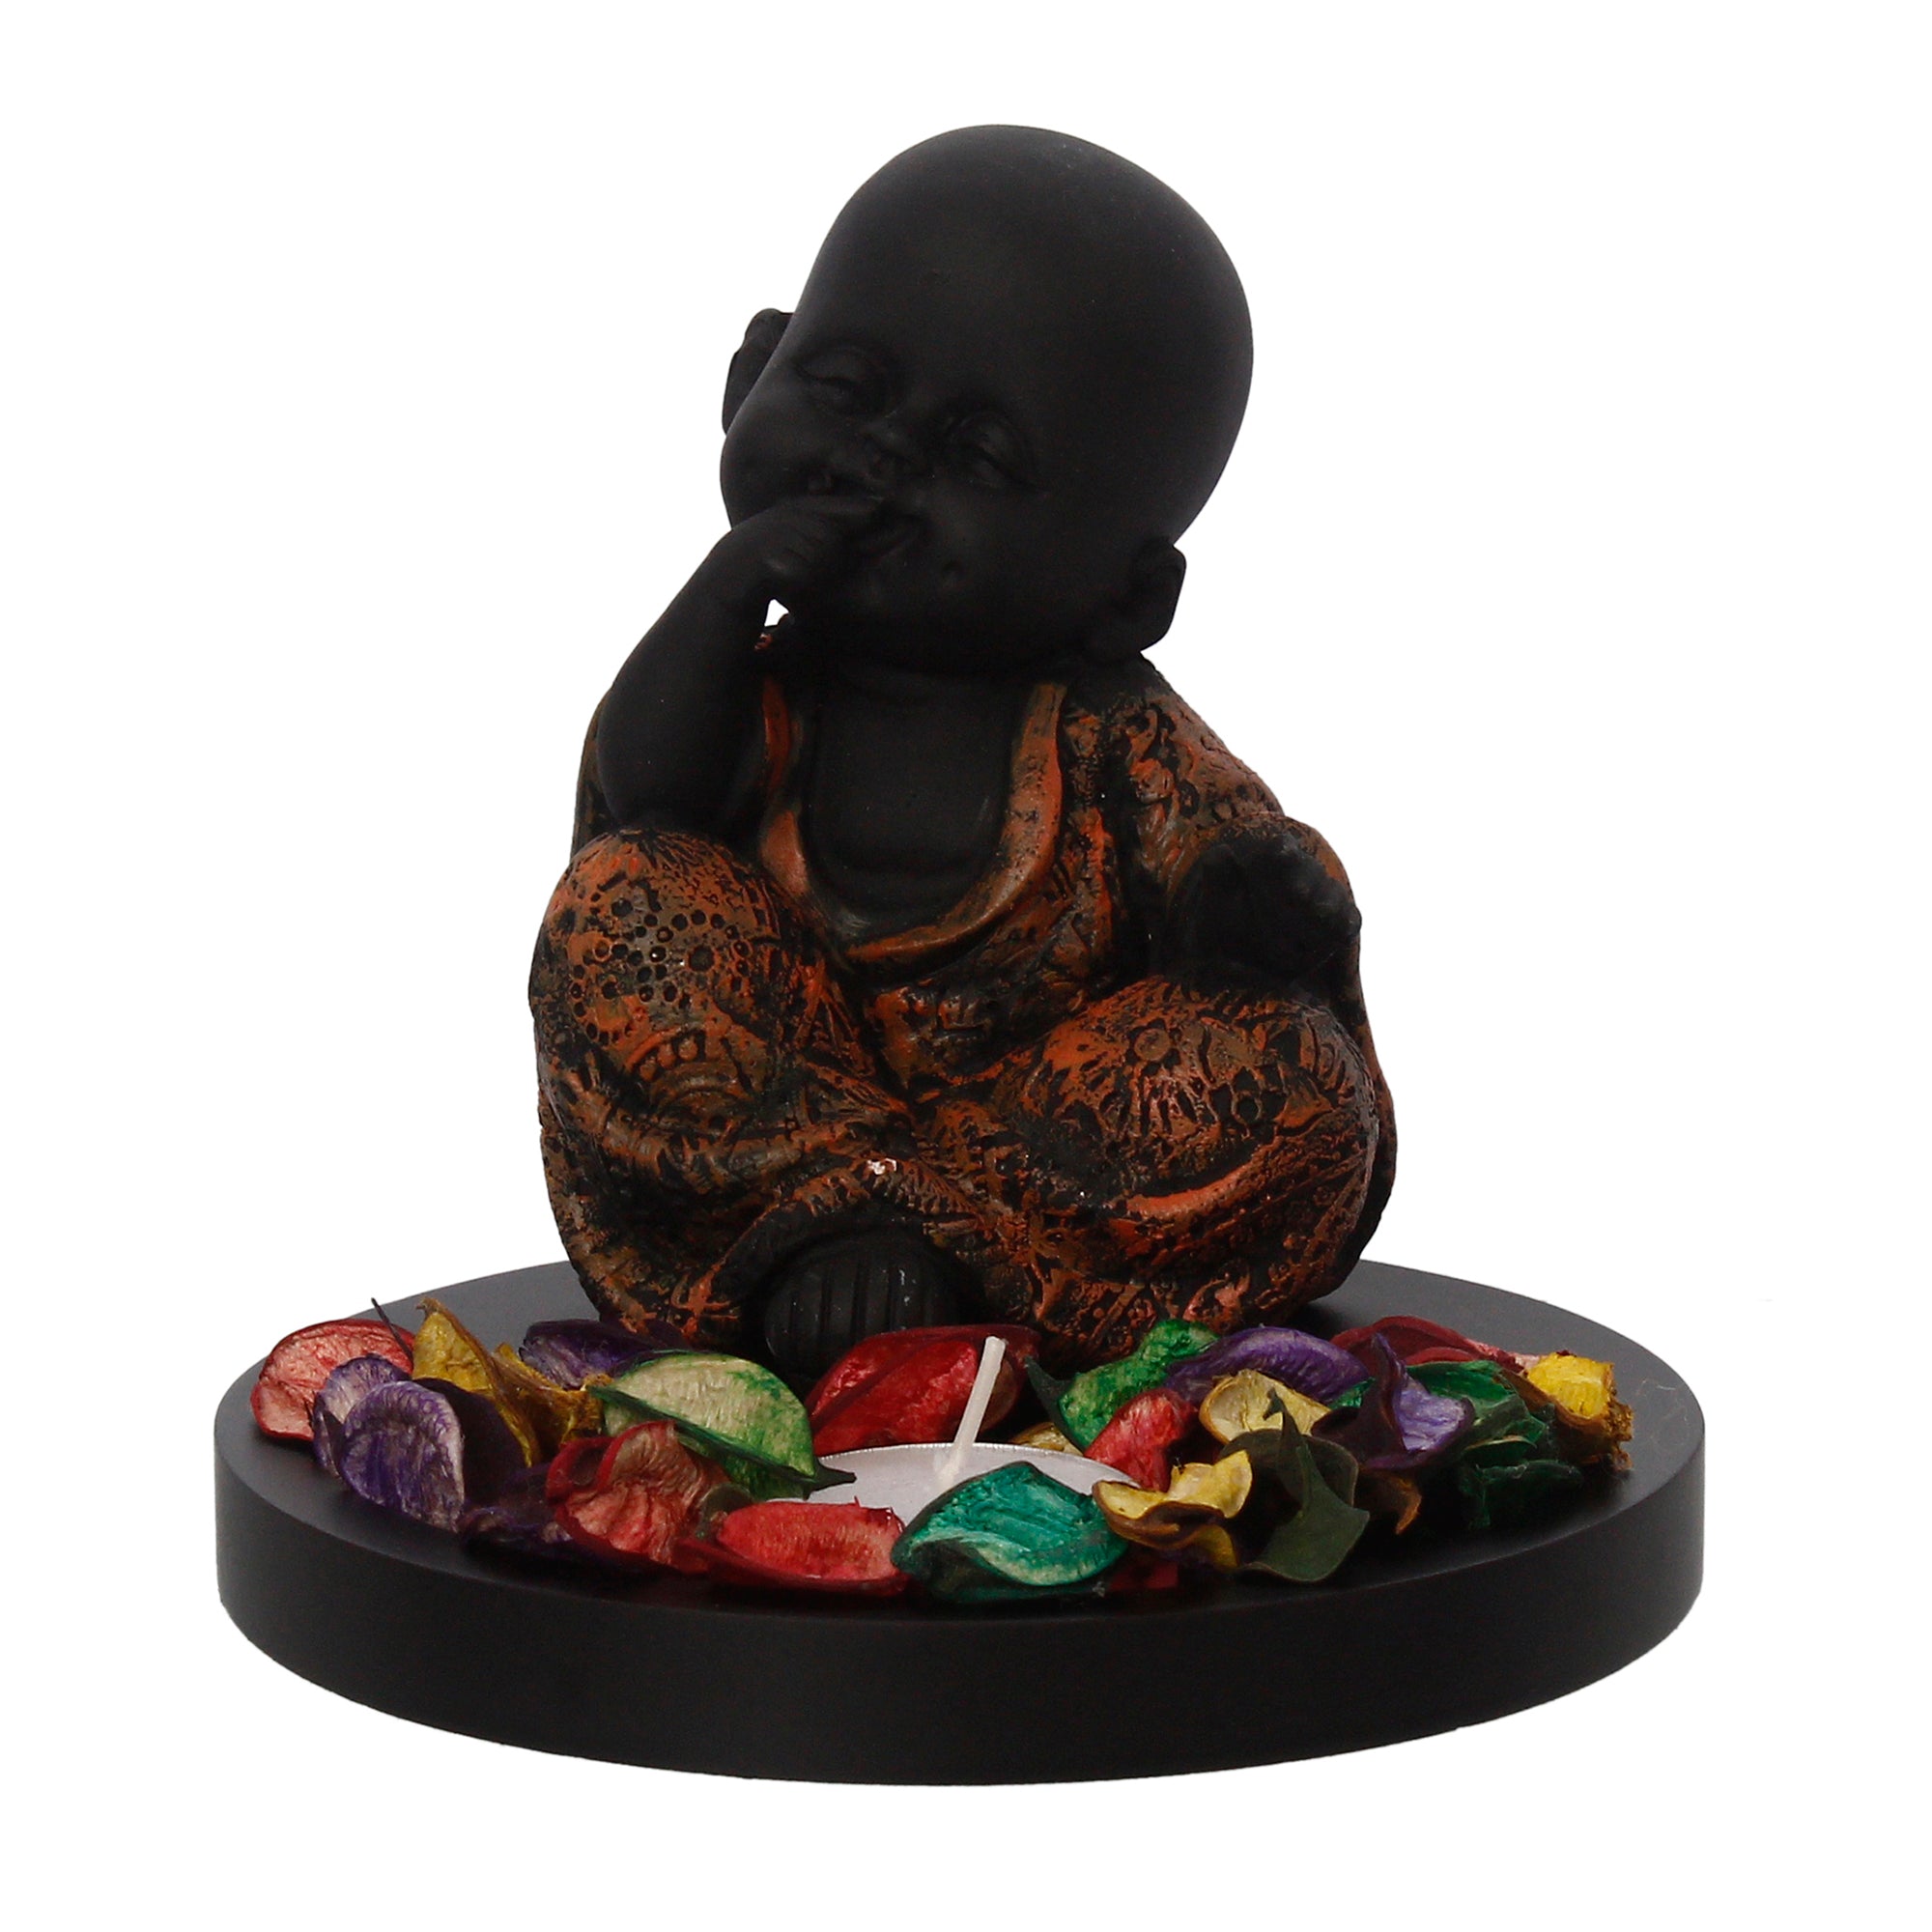 Decorative Smiling Copper Monk Buddha with Wooden Base, Fragranced Petals and Tealight 2